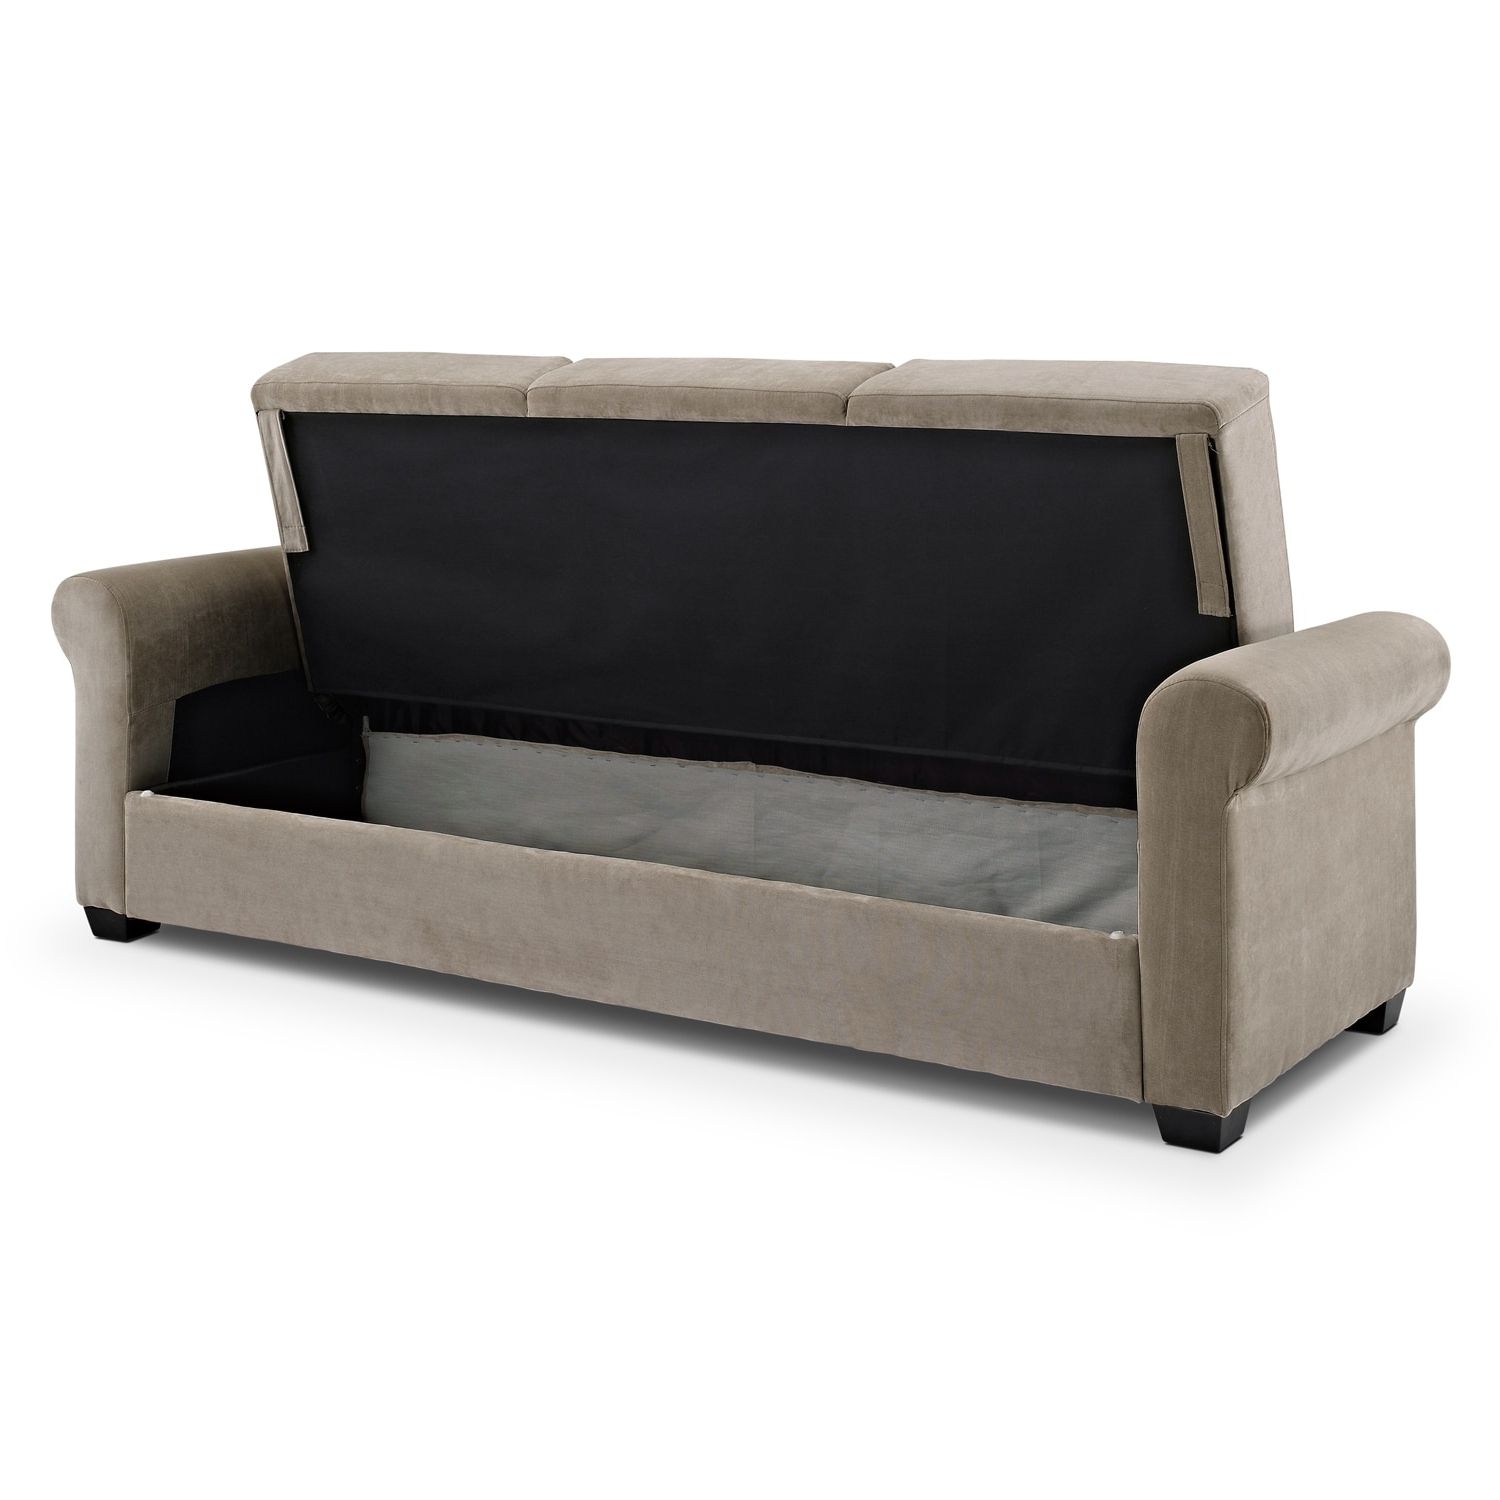 Famous Storage Sofas Pertaining To Comfort And Joy (View 11 of 20)